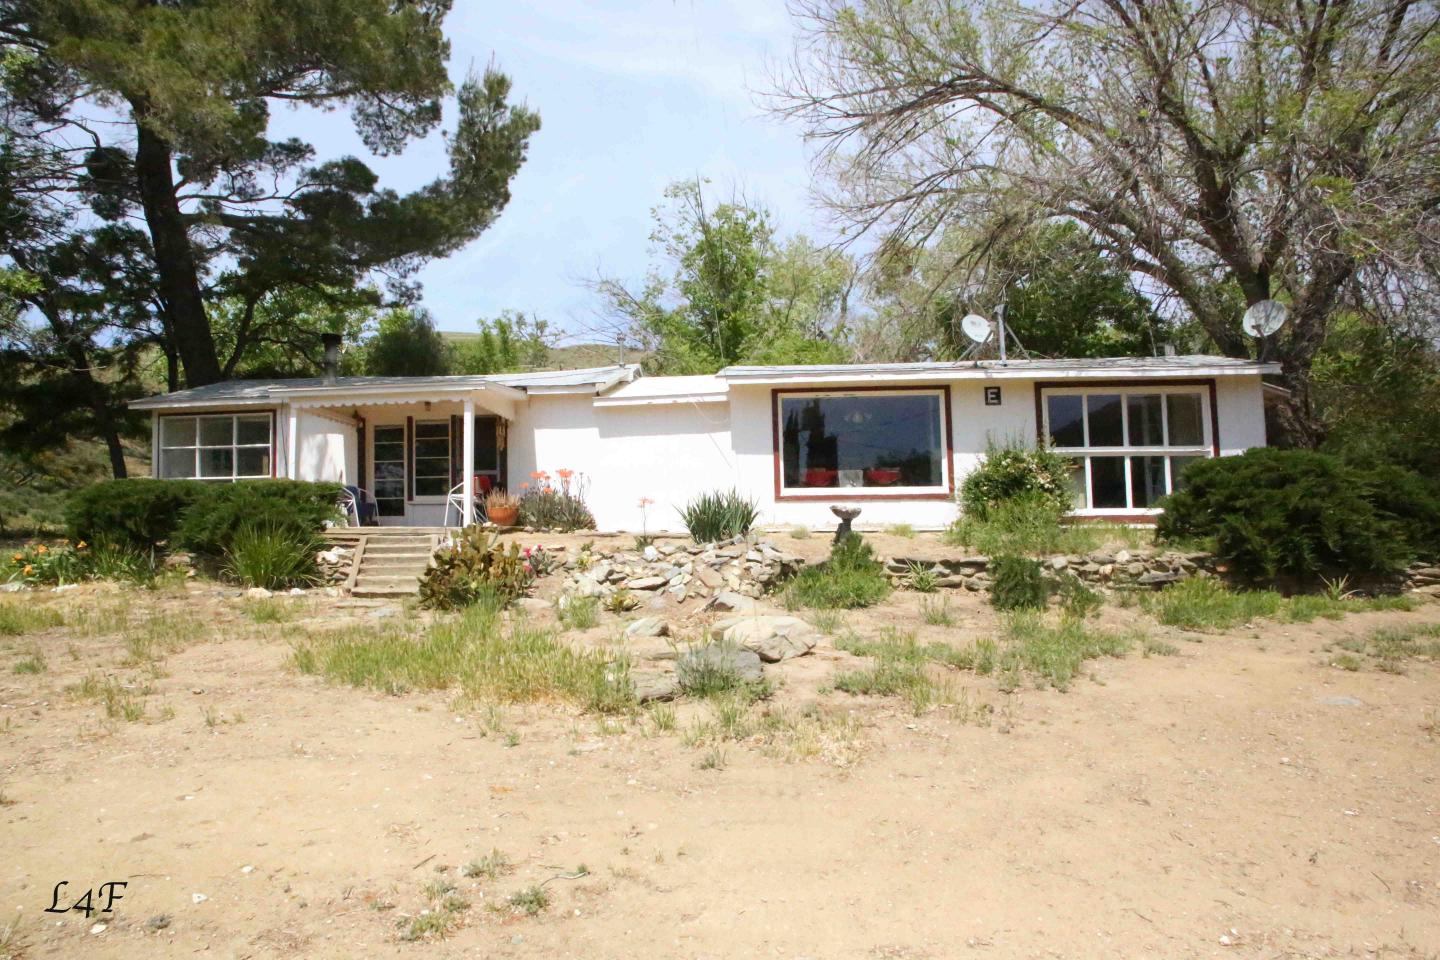 West - Ranch - Old 1970's House - 35900 